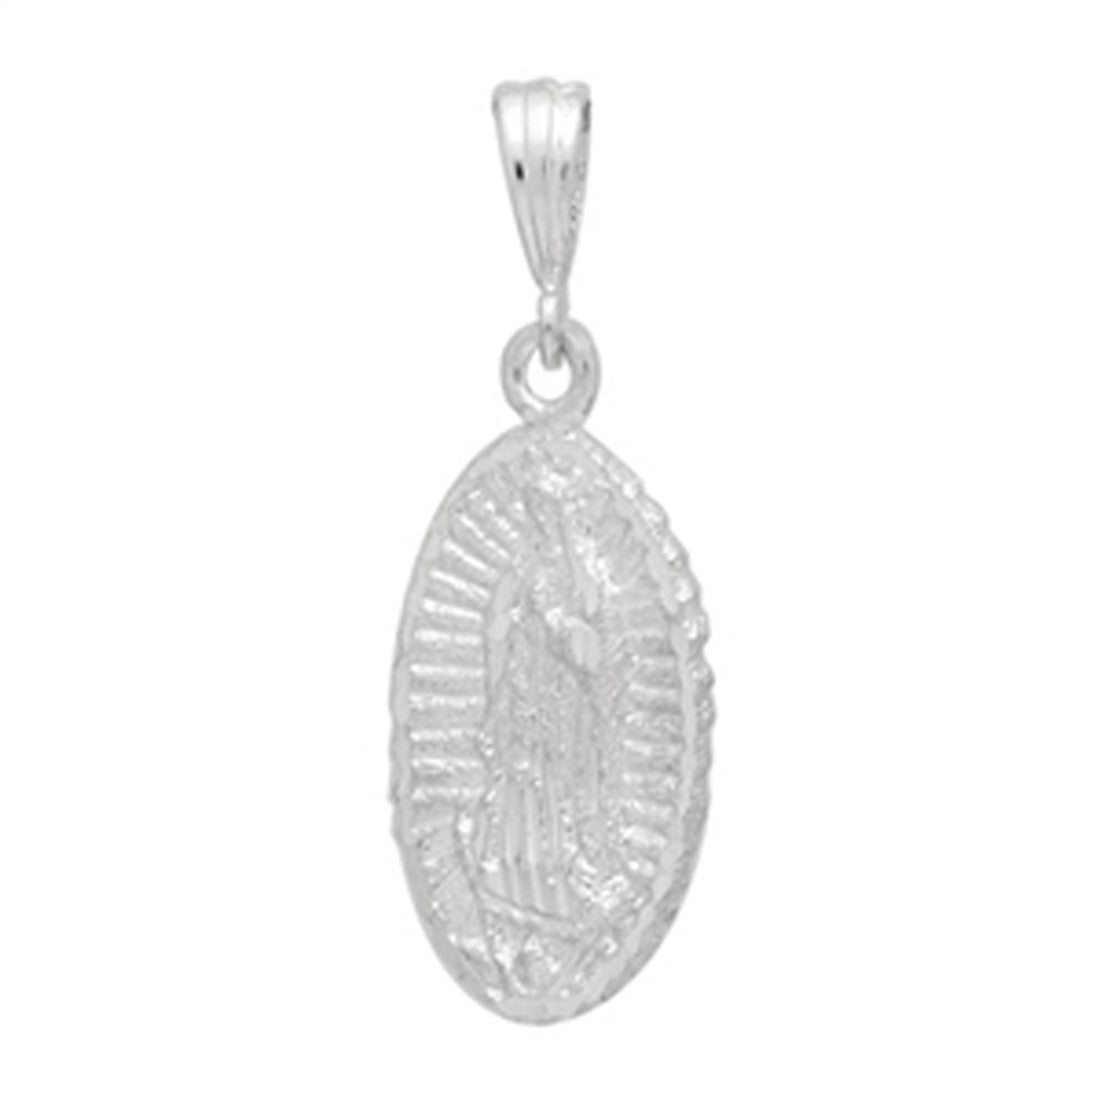 Guadalupe Pendant 925 Sterling Silver charm 38mm Long-Blue Apple Jewelary